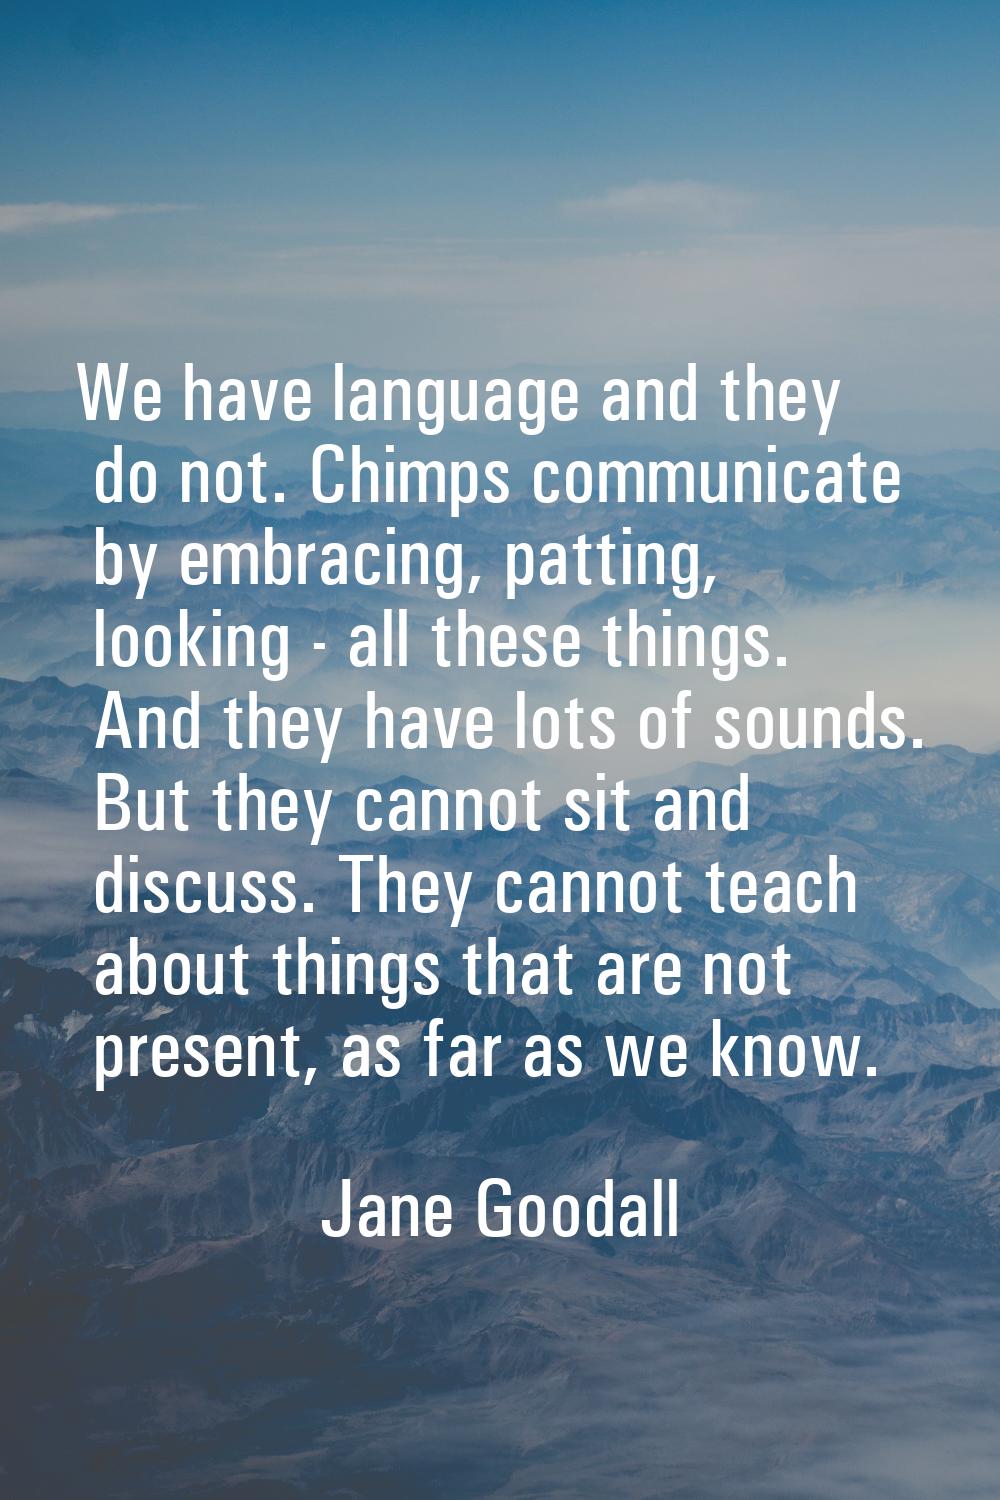 We have language and they do not. Chimps communicate by embracing, patting, looking - all these thi